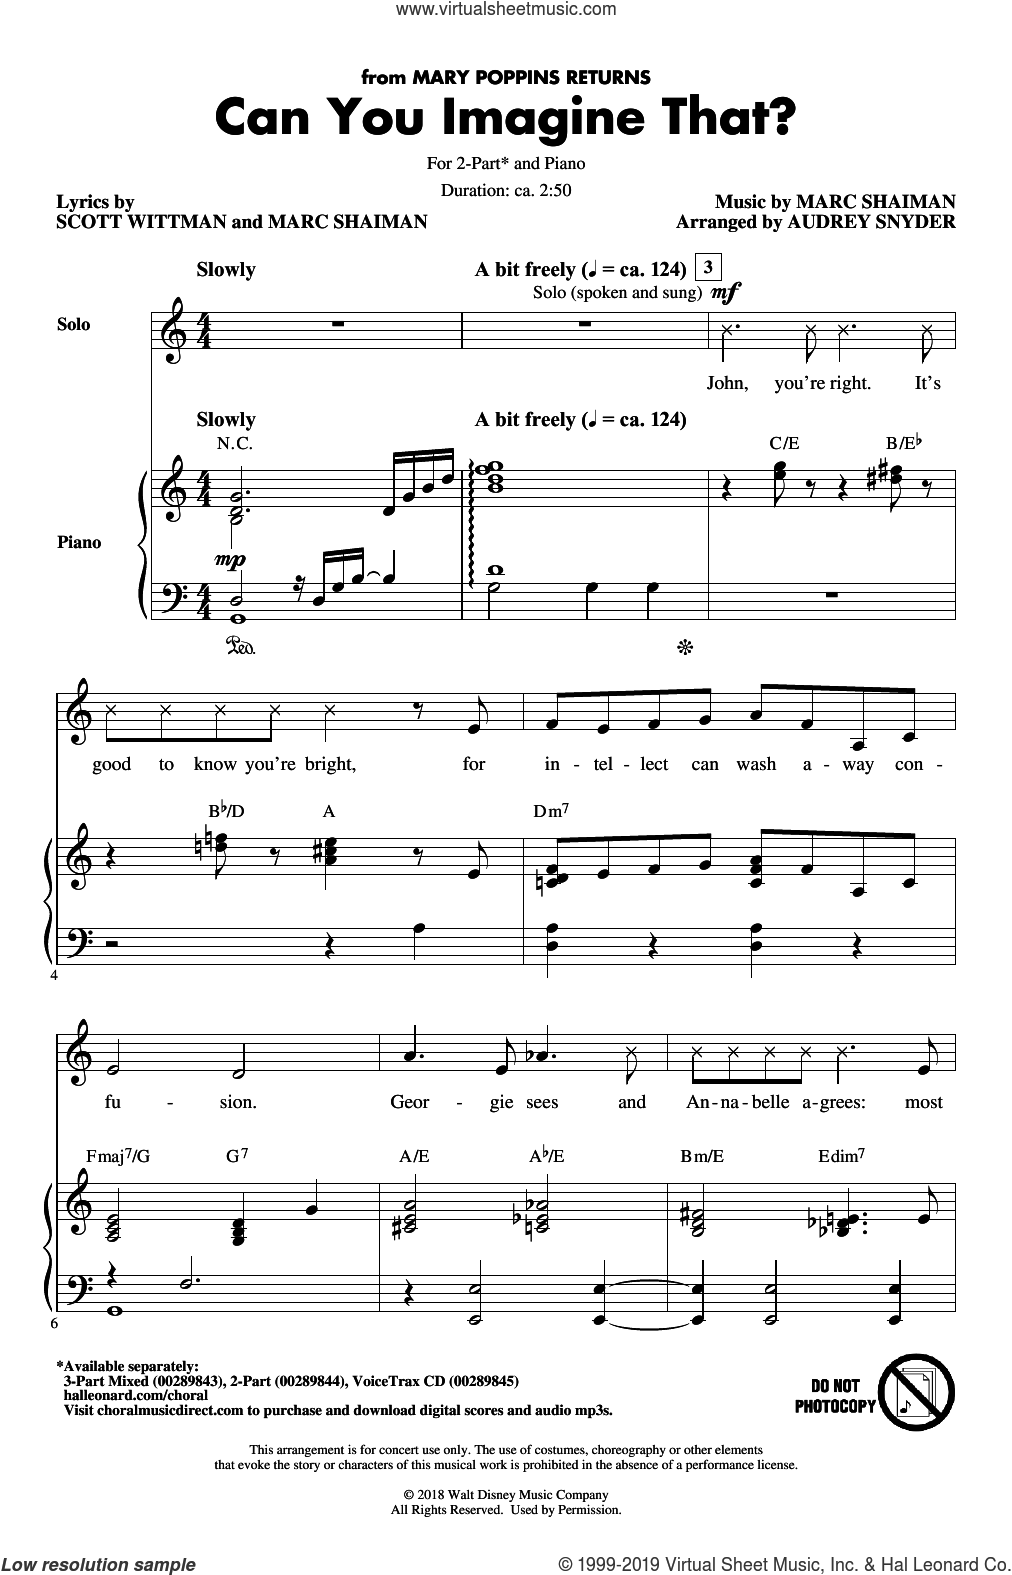 Can You Imagine That Mary Poppins Full Video Company Can You Imagine That From Mary Poppins Returns Arr Audrey Snyder Sheet Music For Choir 2 Part